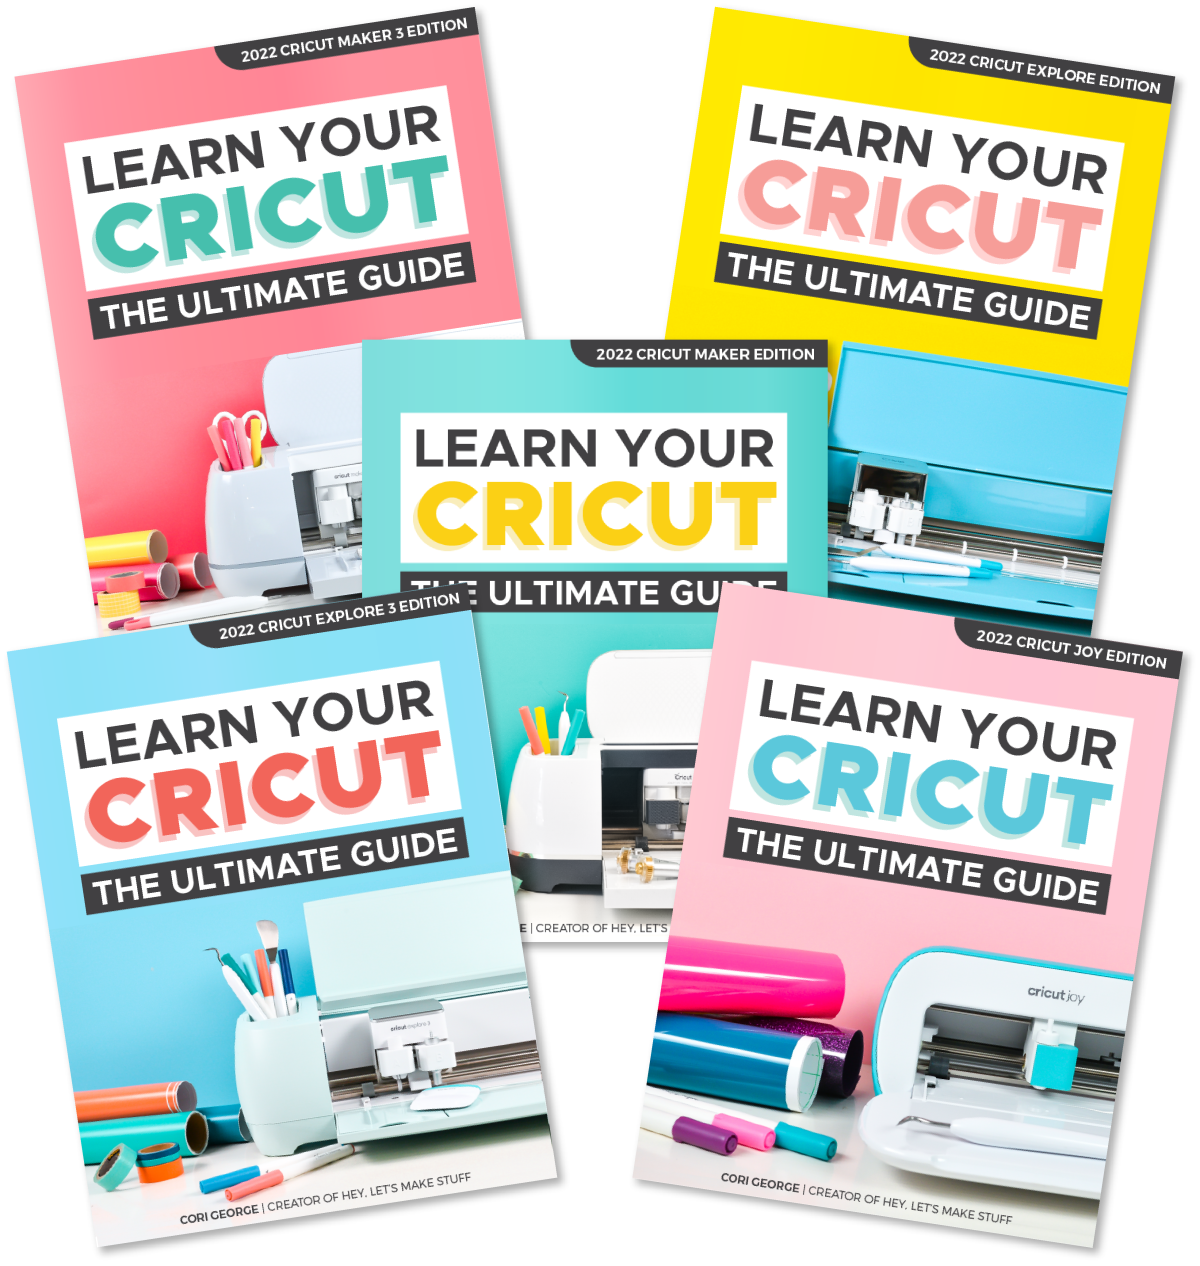 Five Learn Your Cricut books stacked